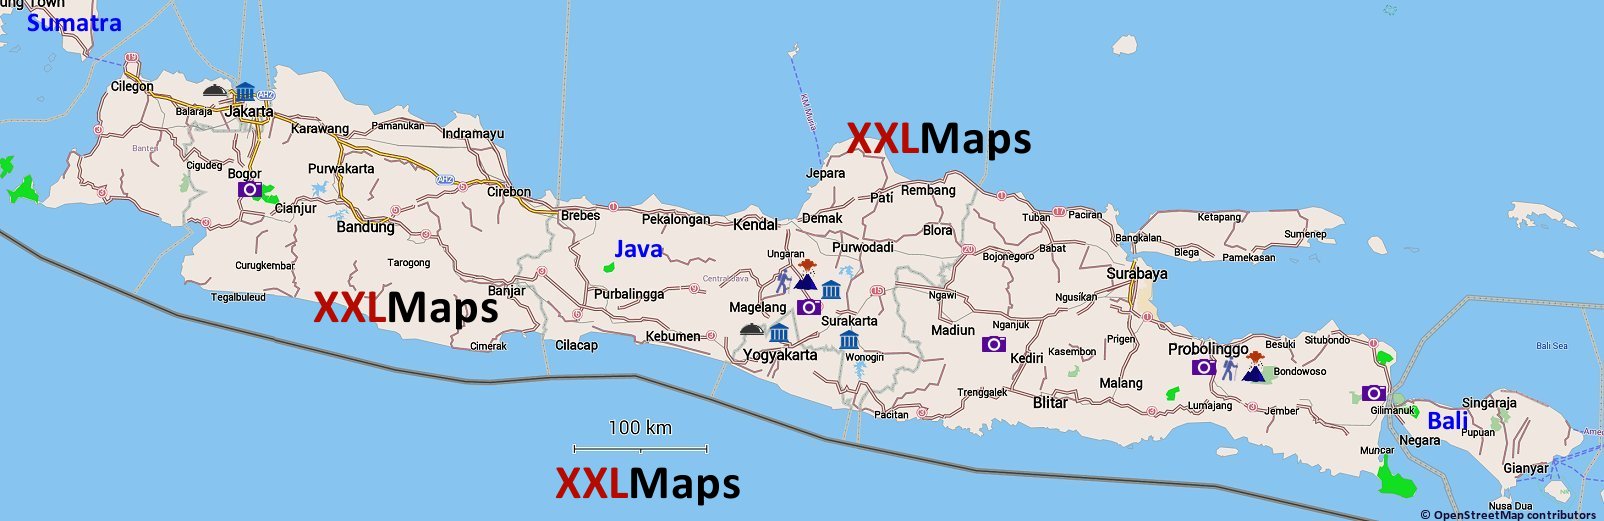 Physical map of Java (Indonesia)